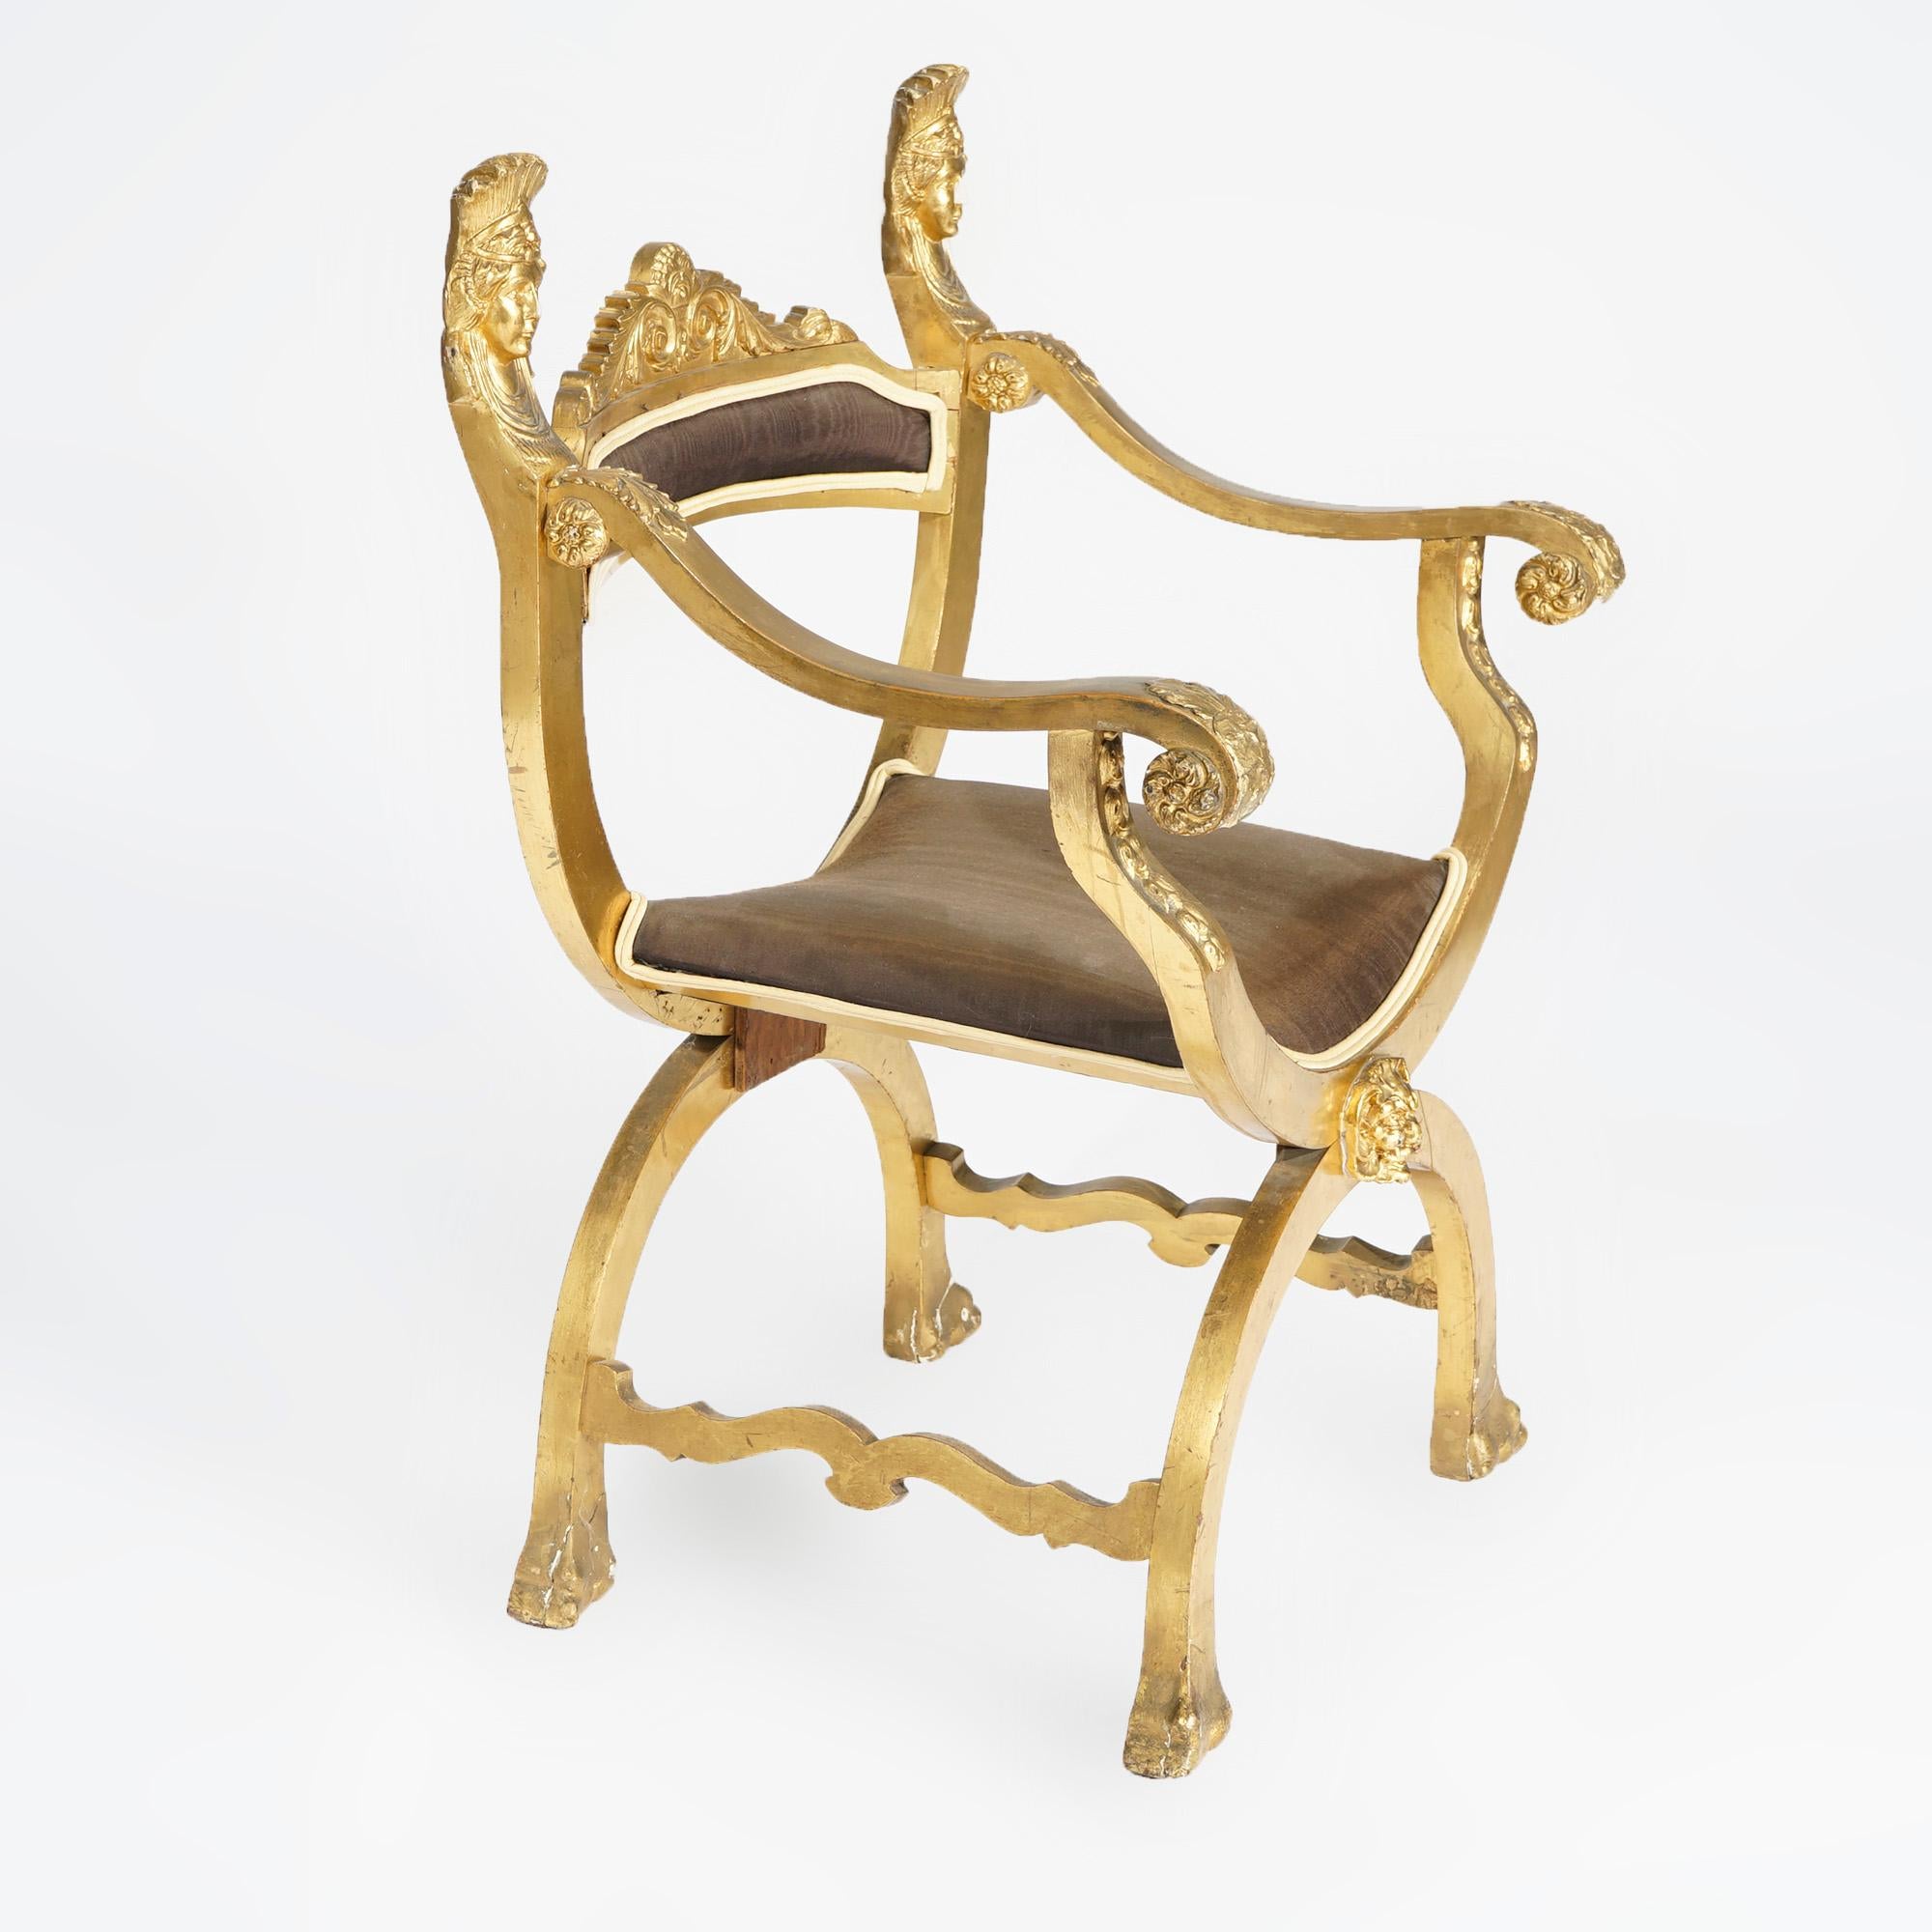 An antique French Louis XIV style figural curule throne chair offers giltwood construction with carved crest having flanking Queen masks, acanthus scroll form arms and satyr medallion below seat, 19th century

Measures- 36'' H x 24'' W x 21.5''